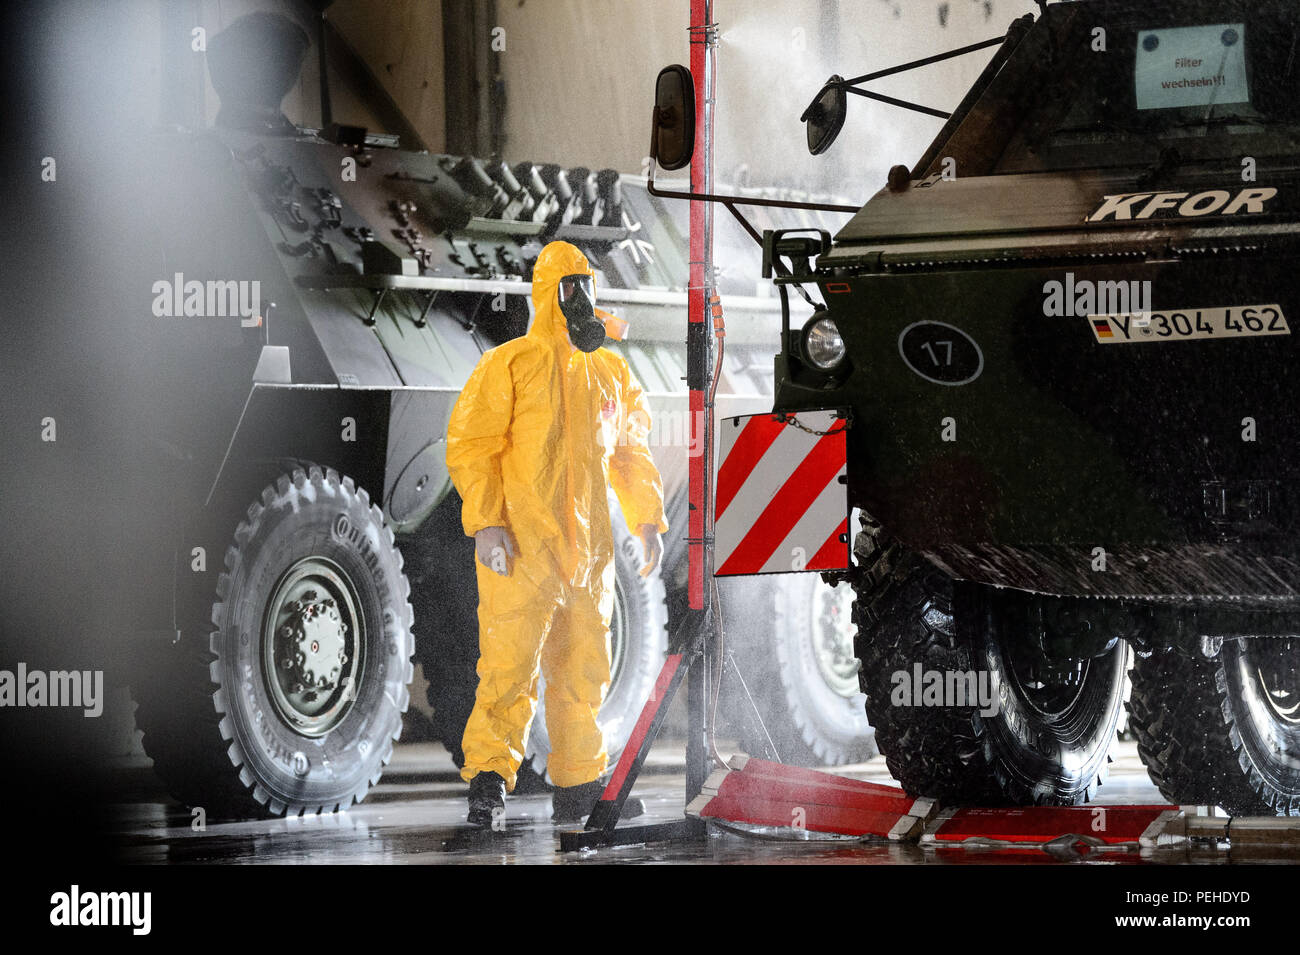 Prizren, Kosovo. 18th July, 2018. A transport tank of the type 'Fuchs'  drives through a kind of car wash in a warehouse and is sprayed with formic  acid. This is intended to